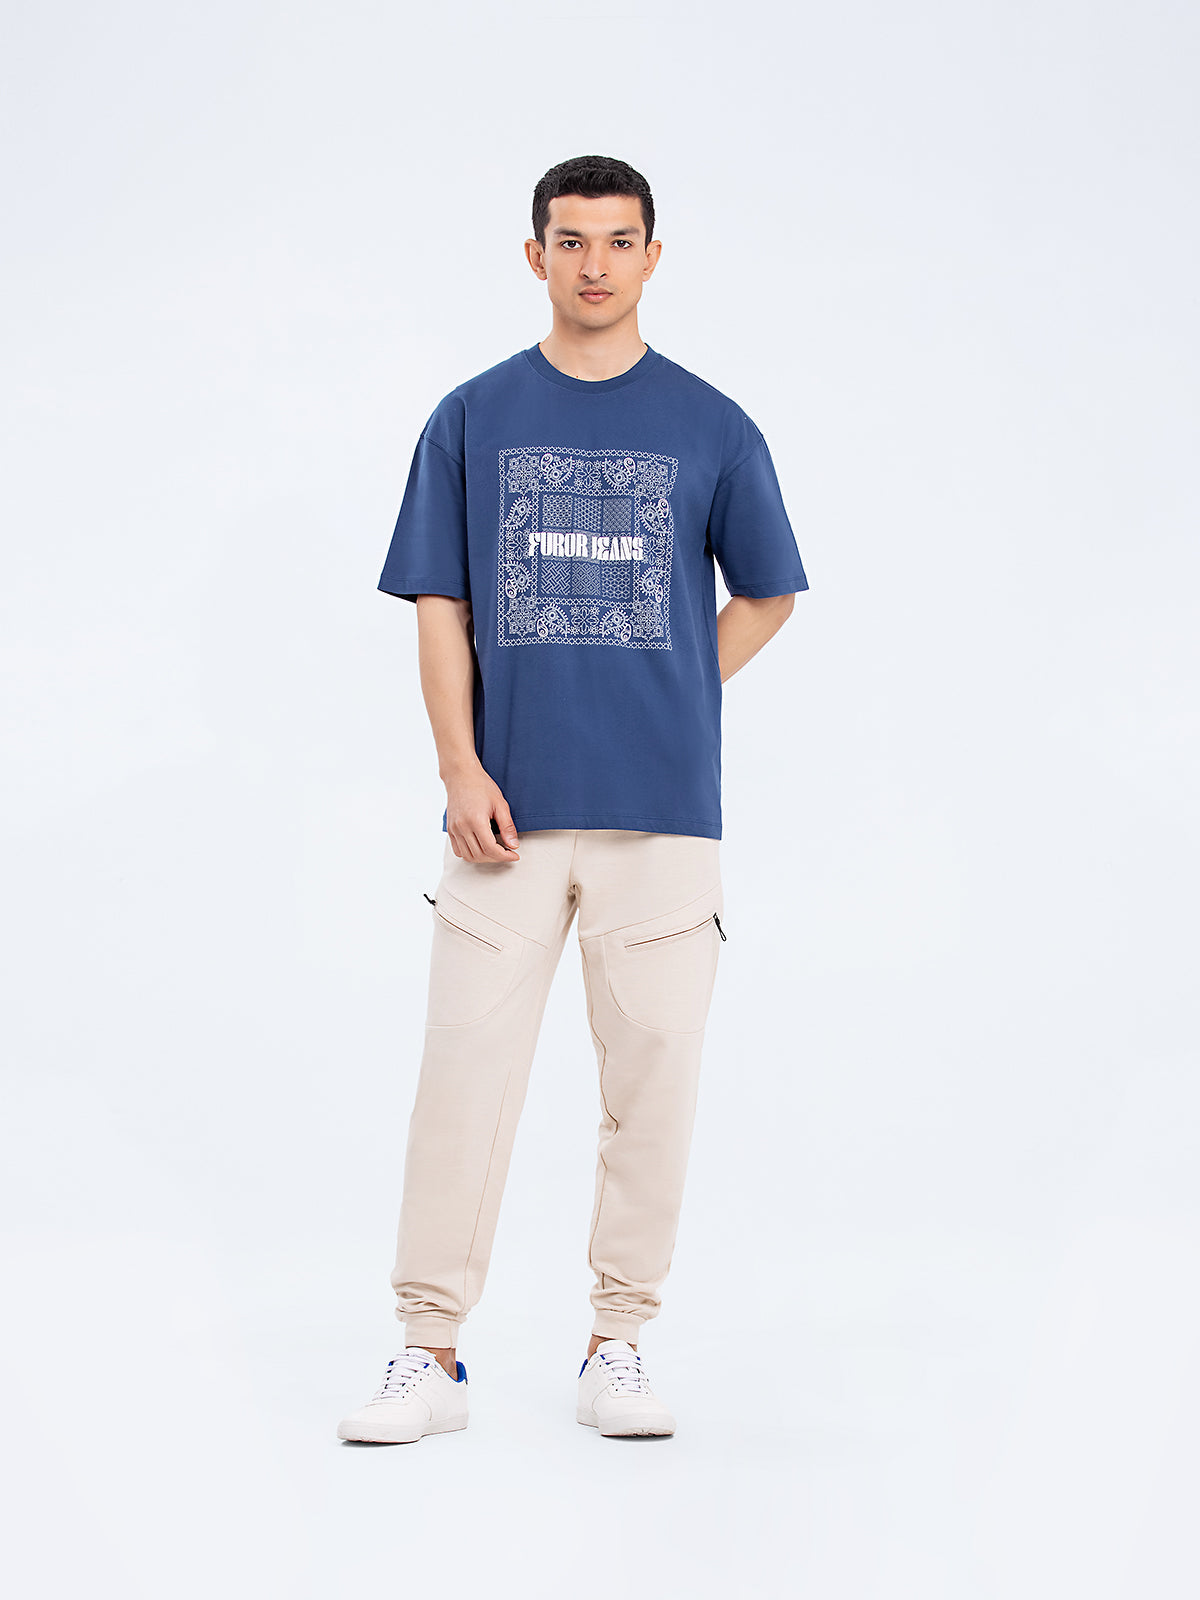 Relaxed Fit Graphic Tee - FMTGT24-006